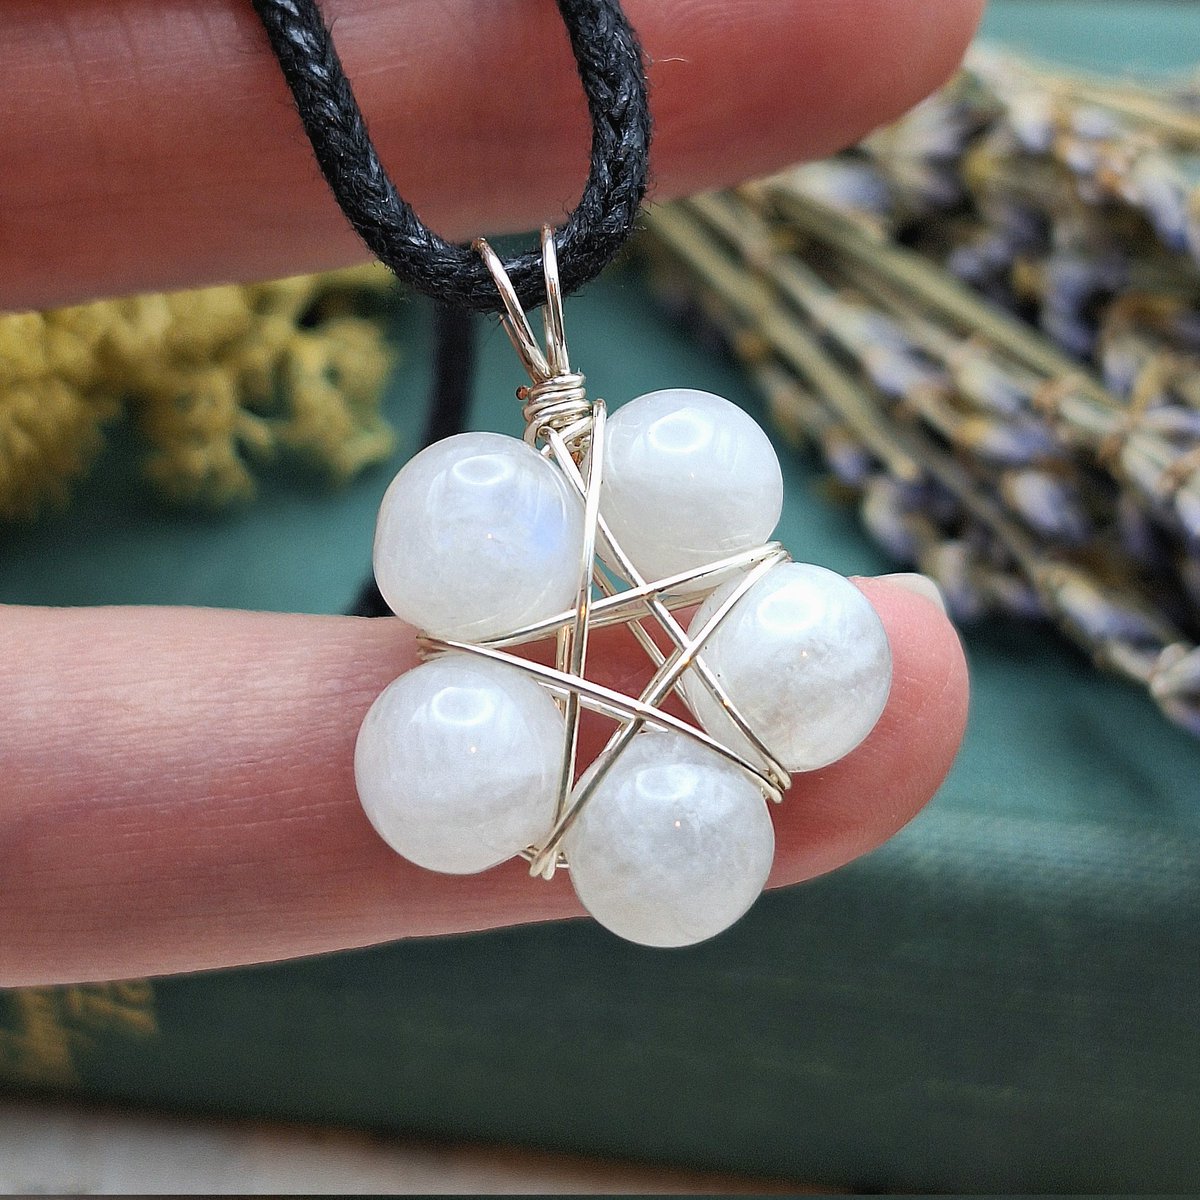 Next month's (June) birthstone is Moonstone.

Another of my favourites. These are moonstone beads wrapped in a star/ flower design.

#moonstone #gemstonejewelry #jewelleryartist #wirewrappedjewelry #wirewrapping #wirewrap #pendant #necklace #witch #elven